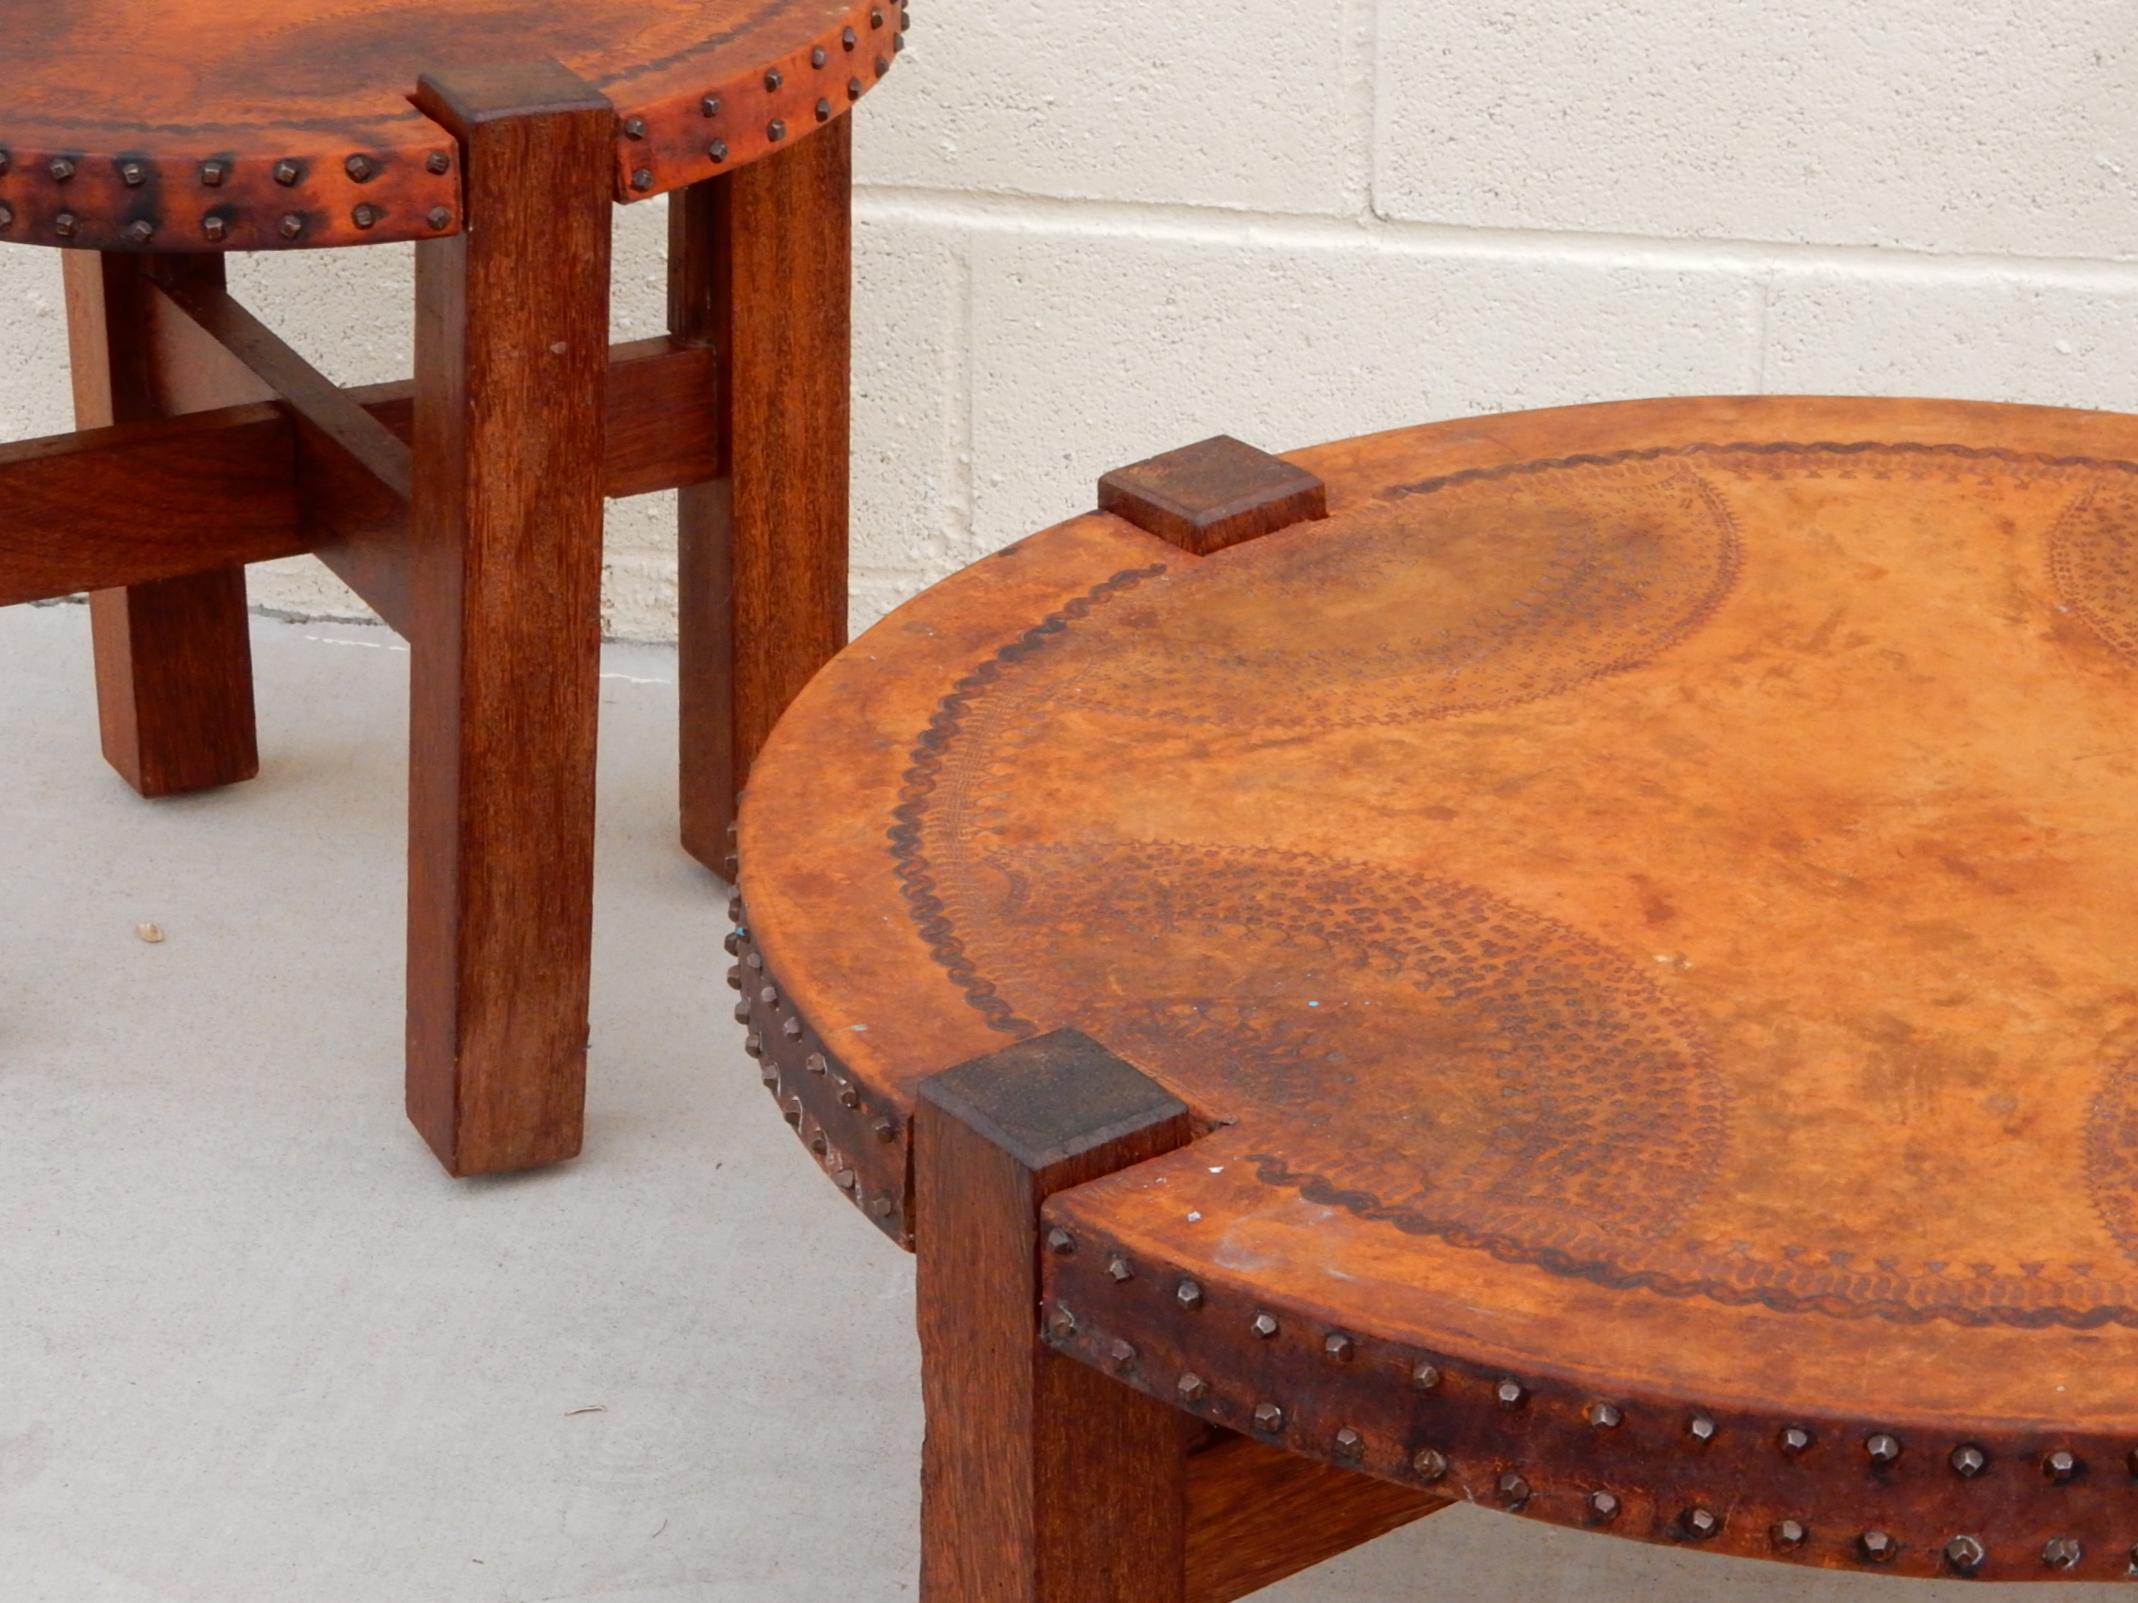 1940s Mission era tooled leather wrapped top table set with hand forged nail edge.
Gorgeous aged patina on leather. Classic Santa Barbara patio design/style.
Sold as a set.

Both disassemble with ease into 3 parts.
Size:
large is 32 W x 14 T,